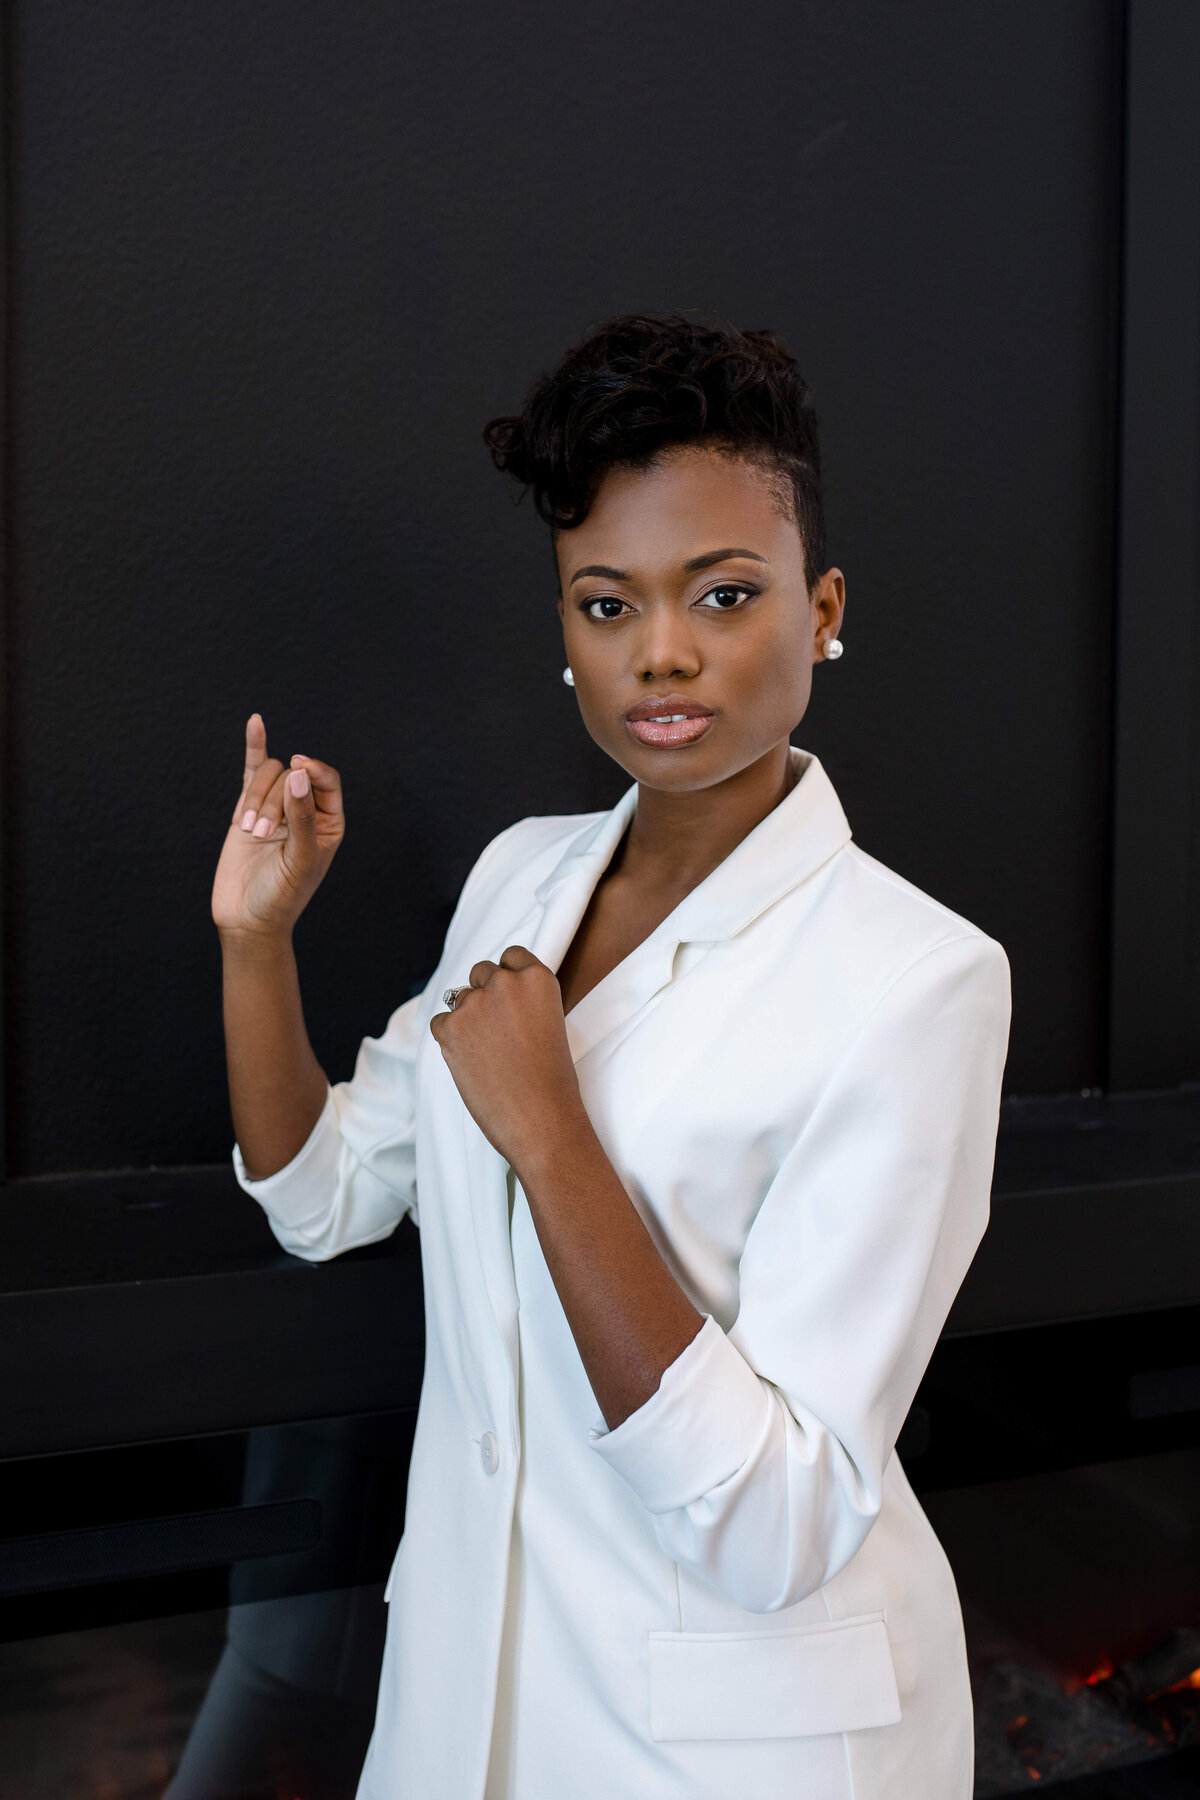 Commercial photographers captures brand of photo head shop with woman in a white blazer posing on a black background for clothing brand photo shoot ideas